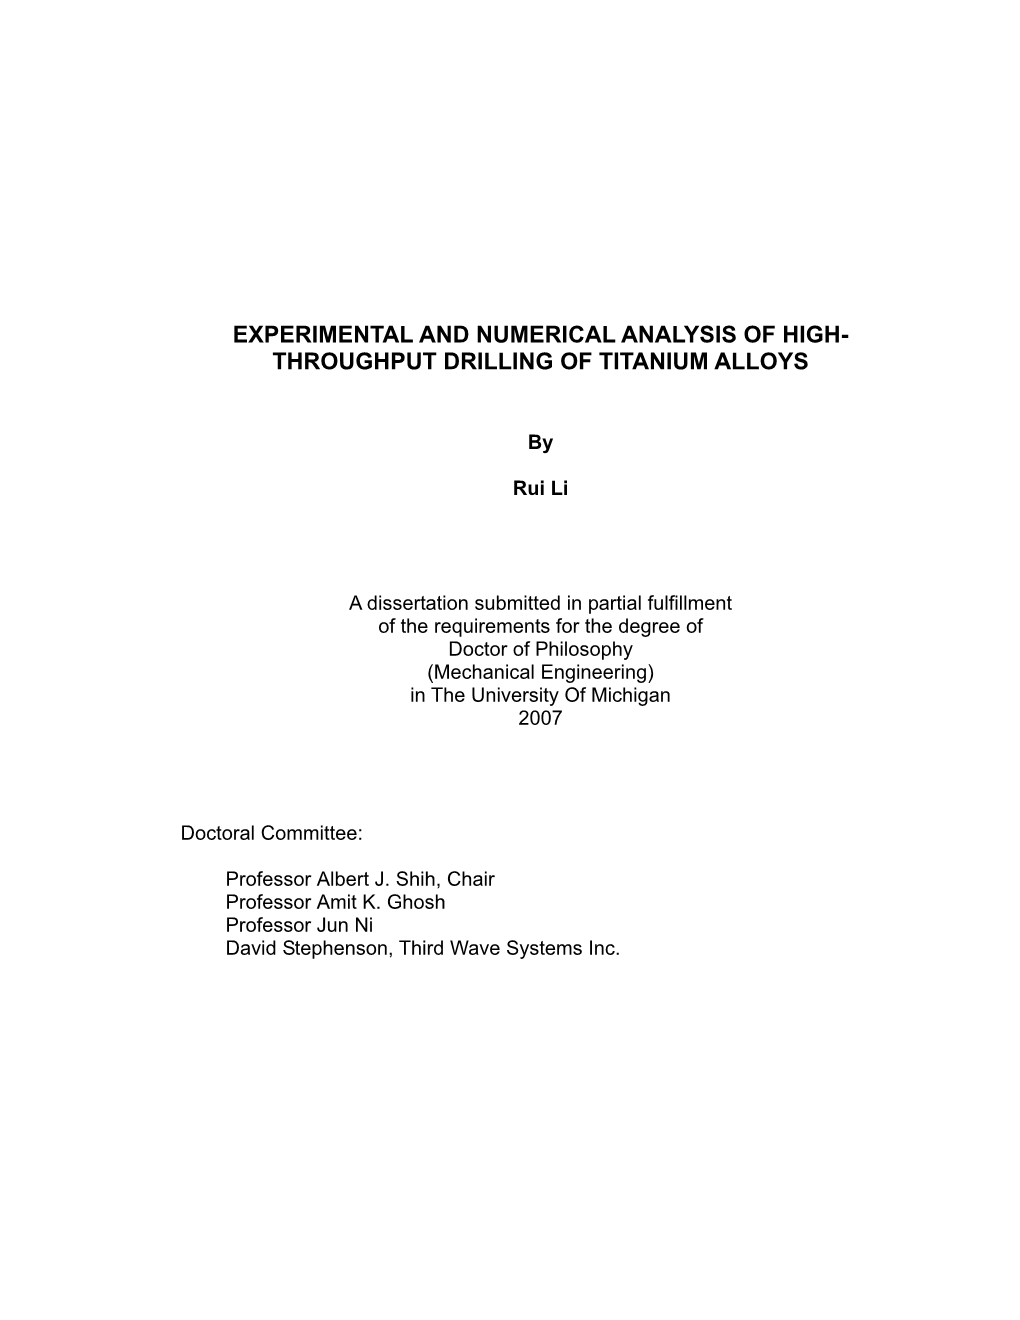 Experimental and Numerical Analysis of High-Throughput Drilling Of